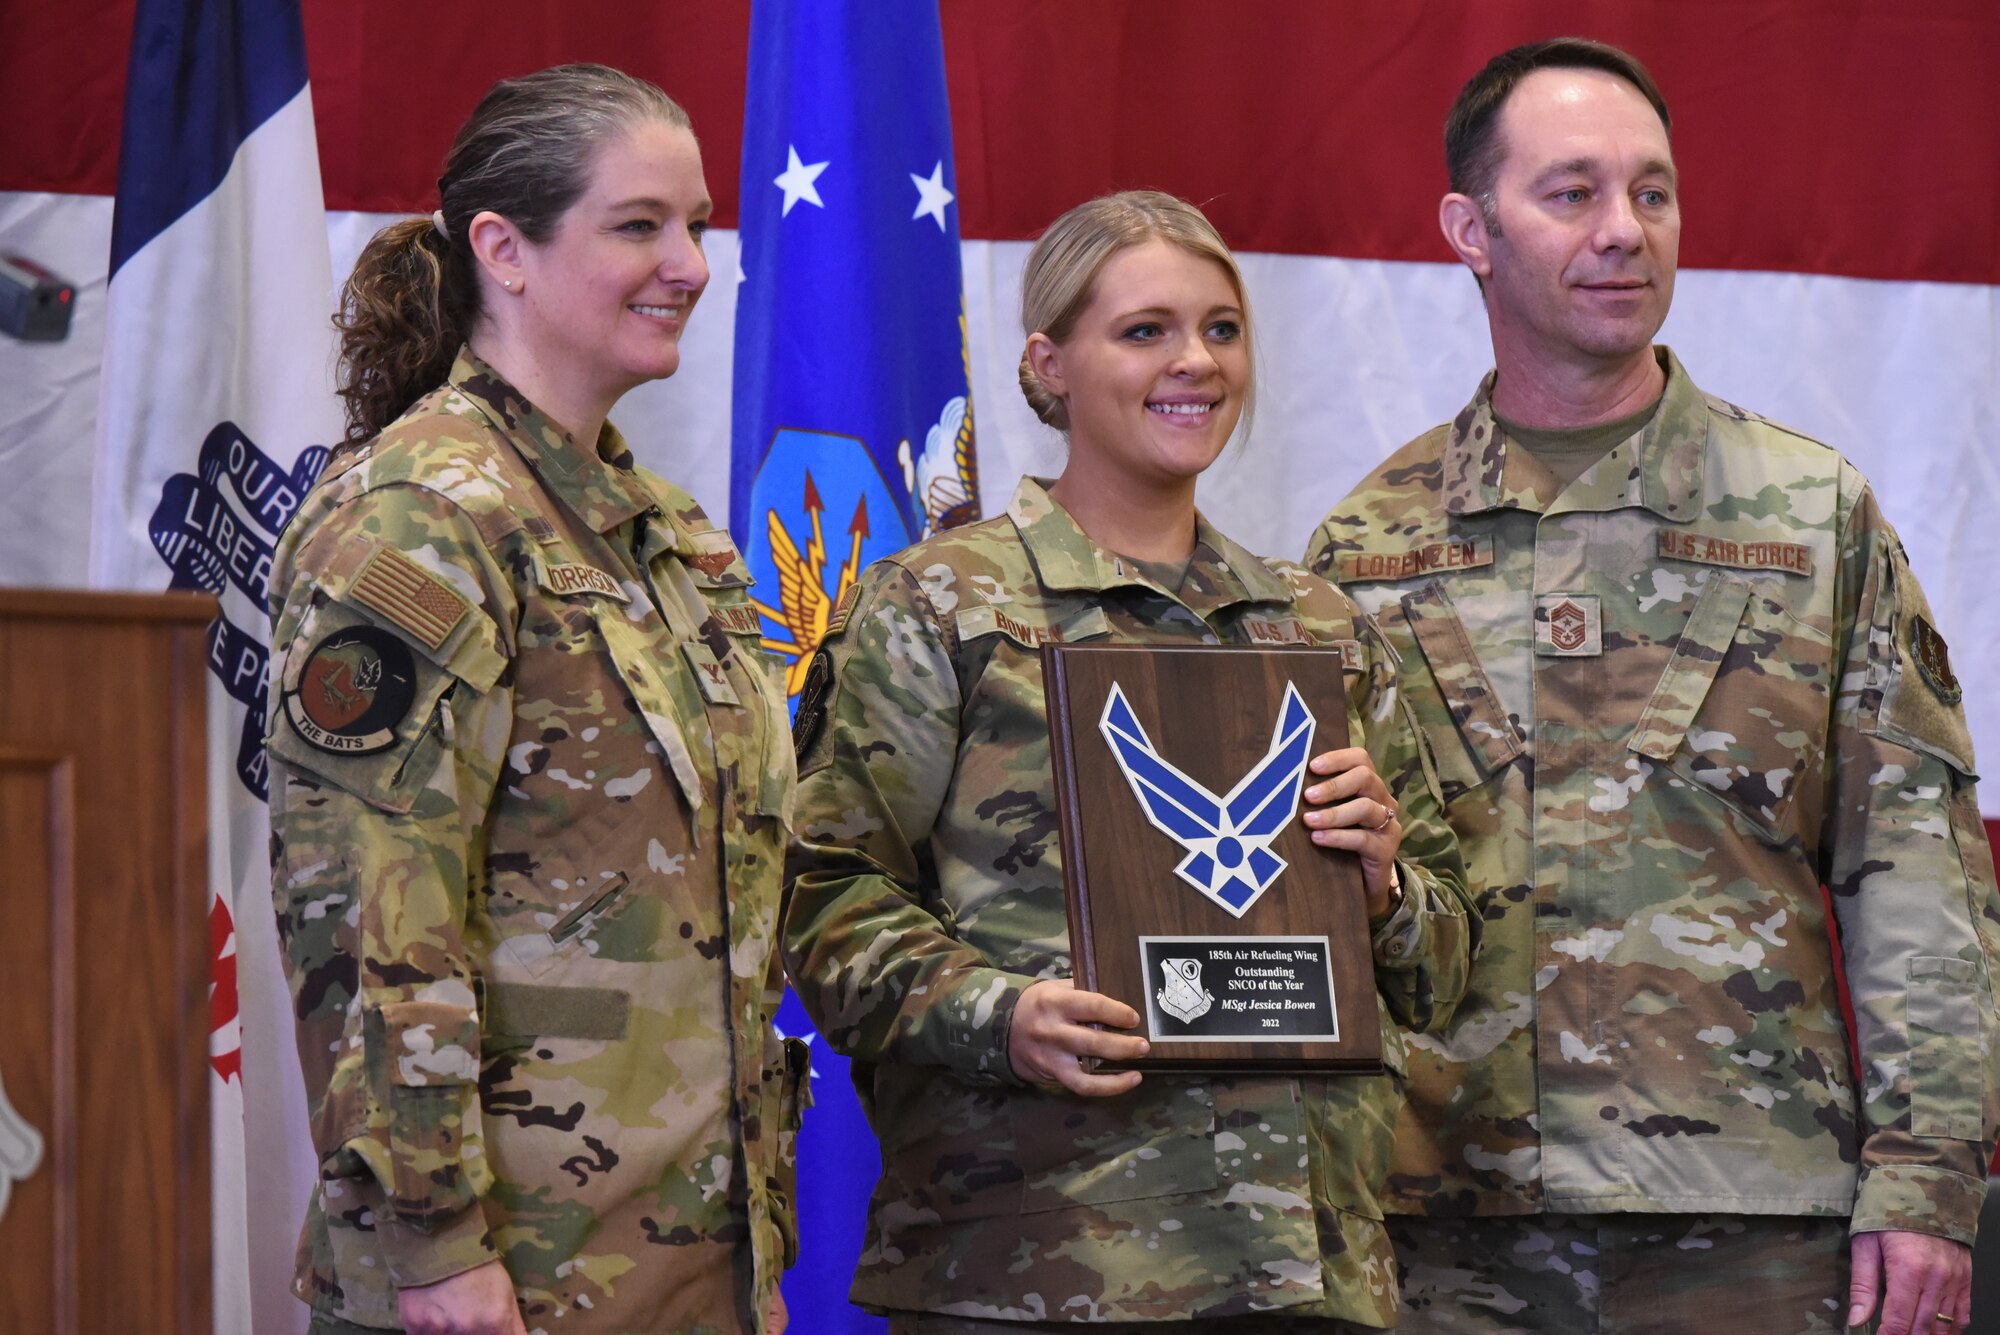 Master Sgt. Jessica Bowen poses with plaque for a photo